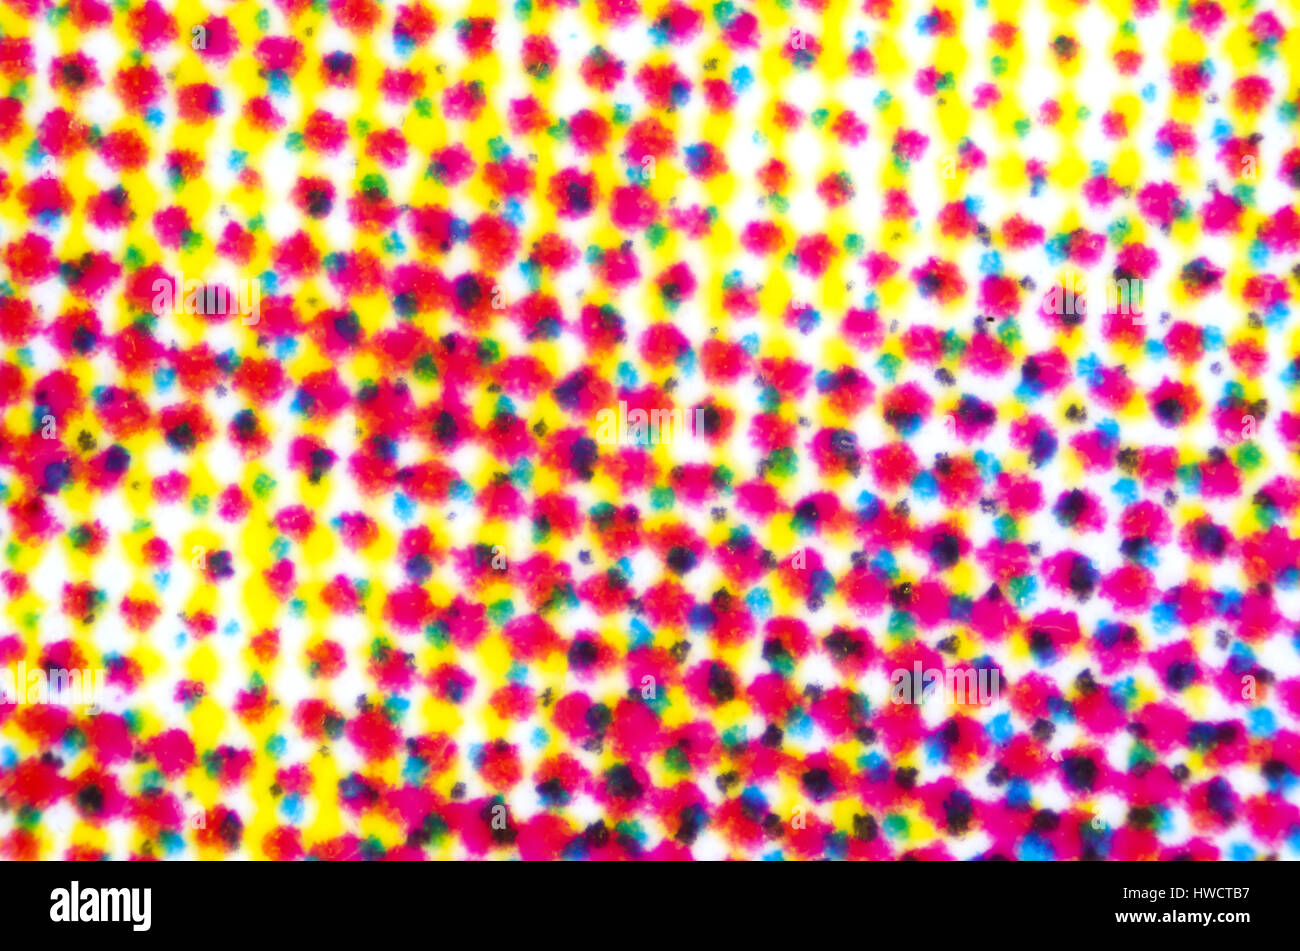 Four color printing on white paper under the microscope. CMYK Cyan Magenta Yellow and Key or black color process. Subtractive color mixing. Stock Photo